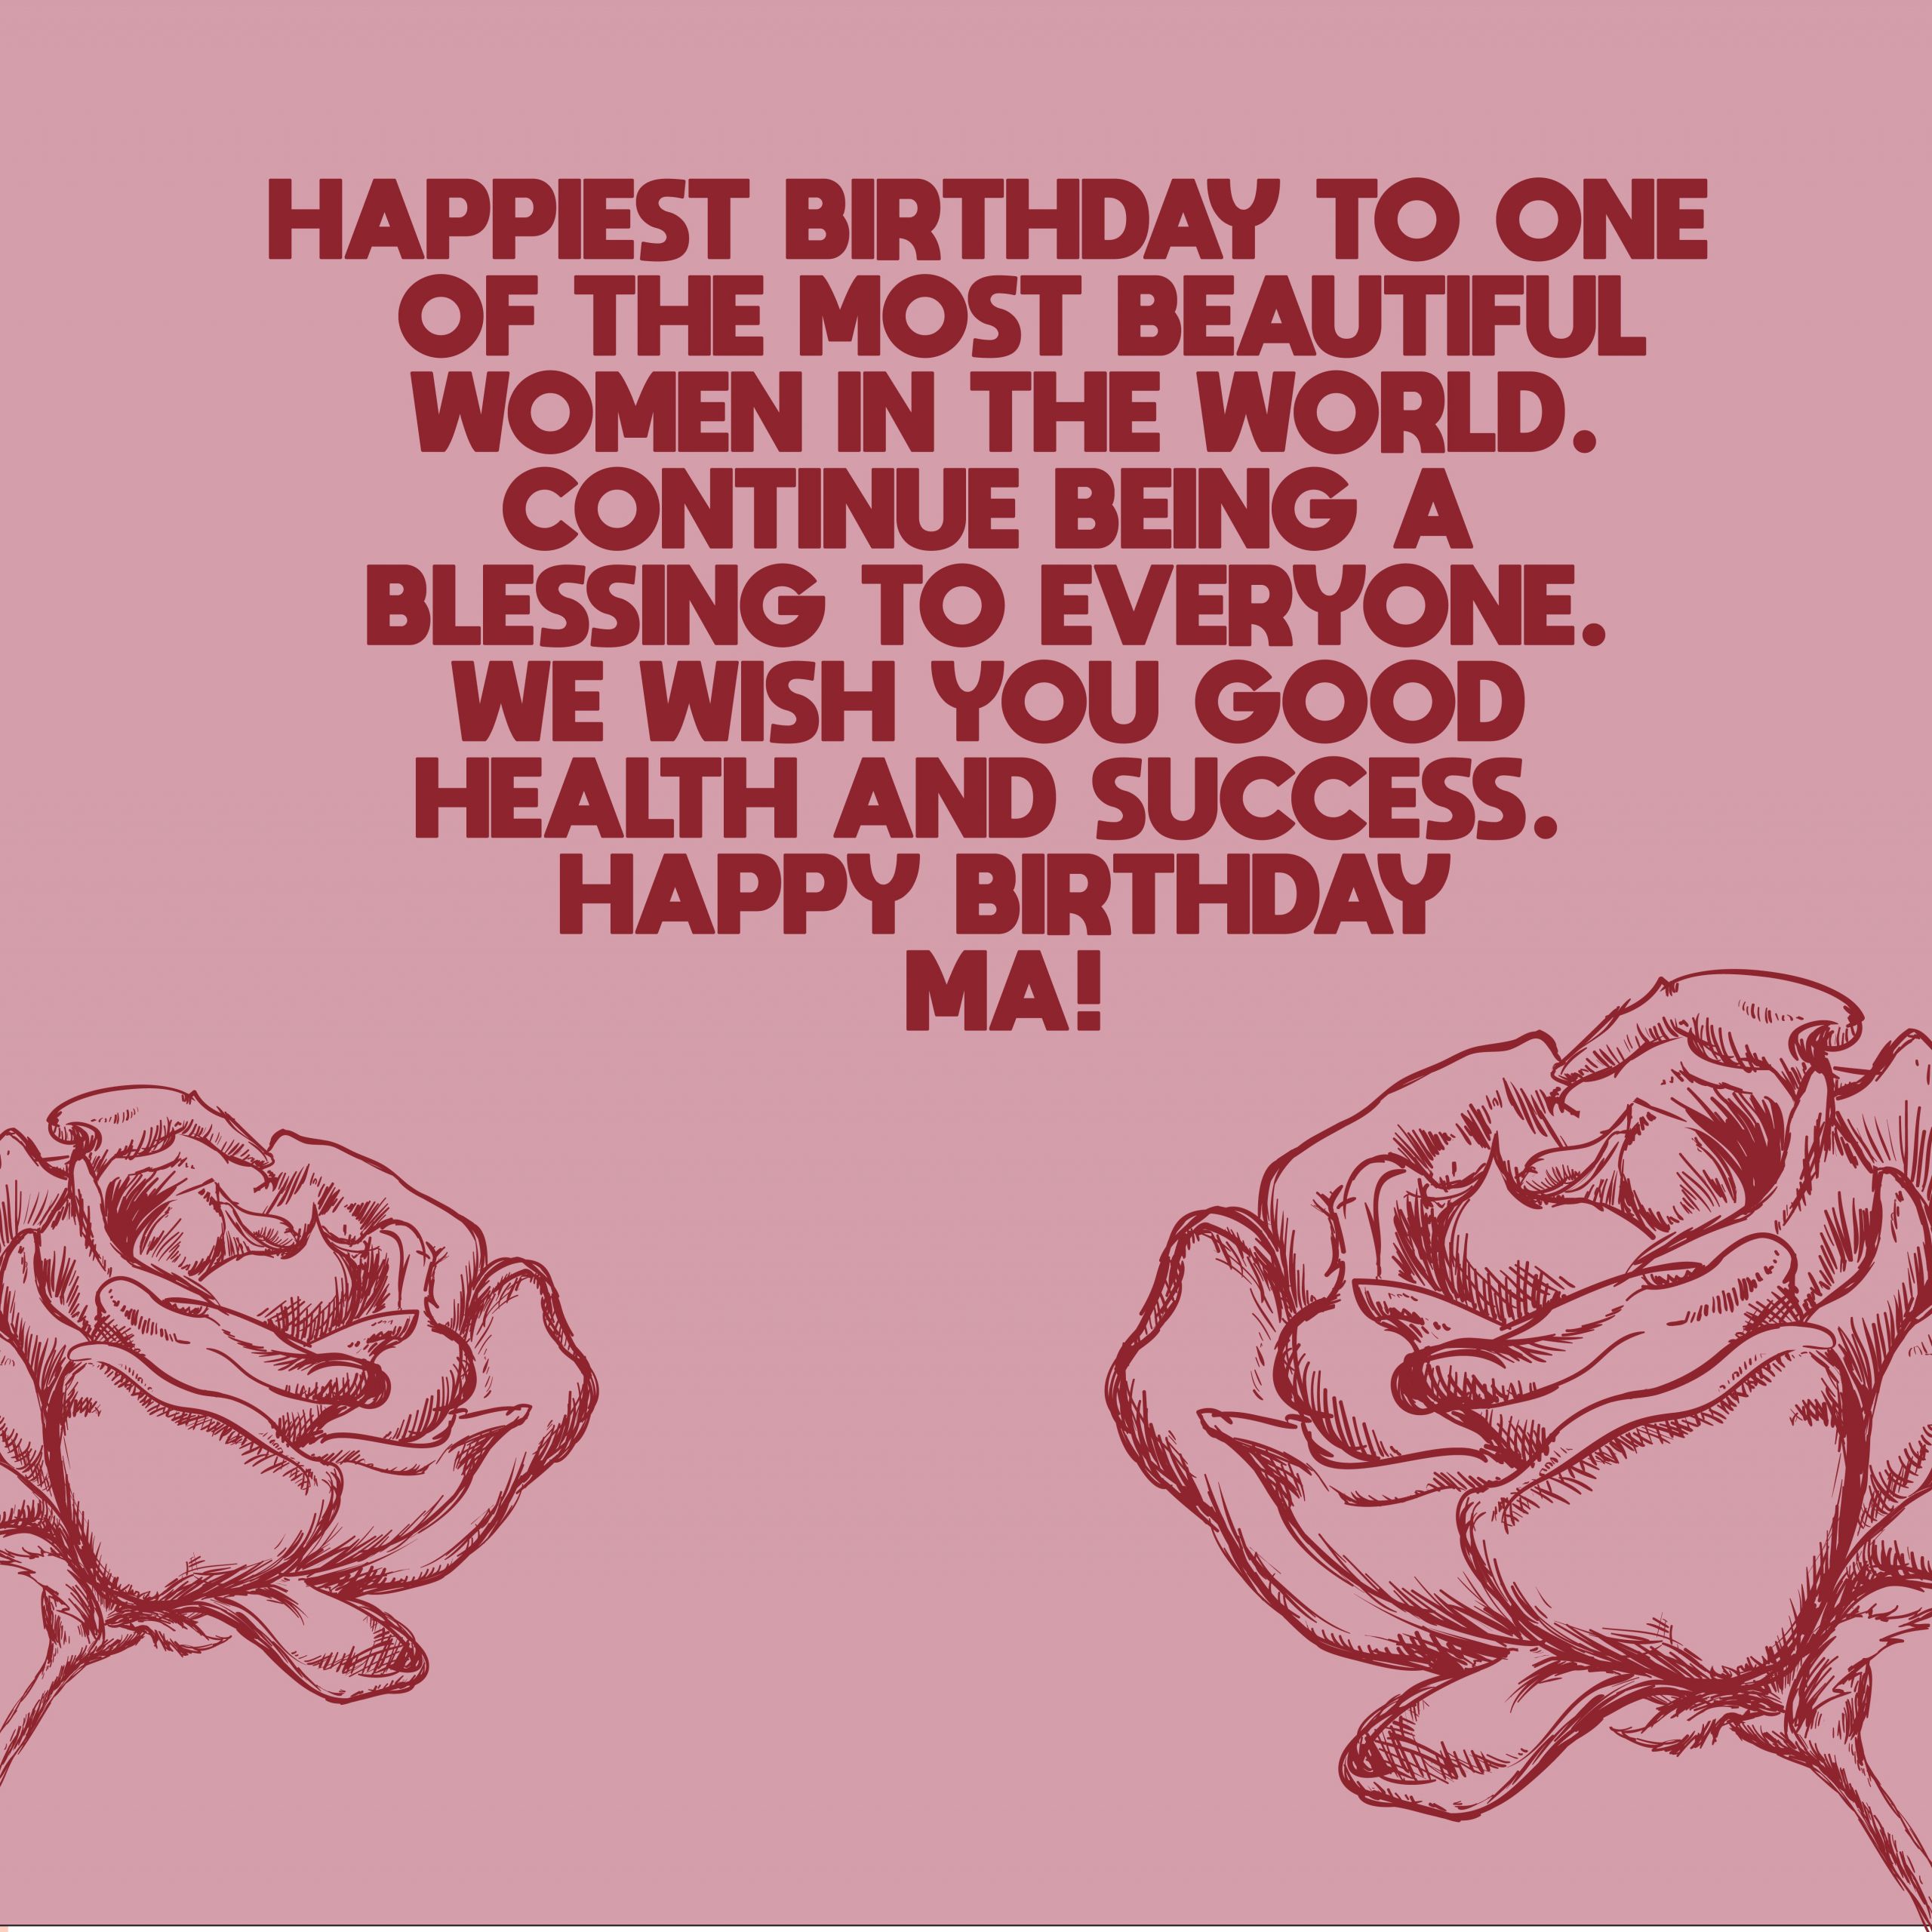 Happy Birthday Quote For Mother In Law
 The 200 Happy Birthday Mother in Law Quotes – Top Happy